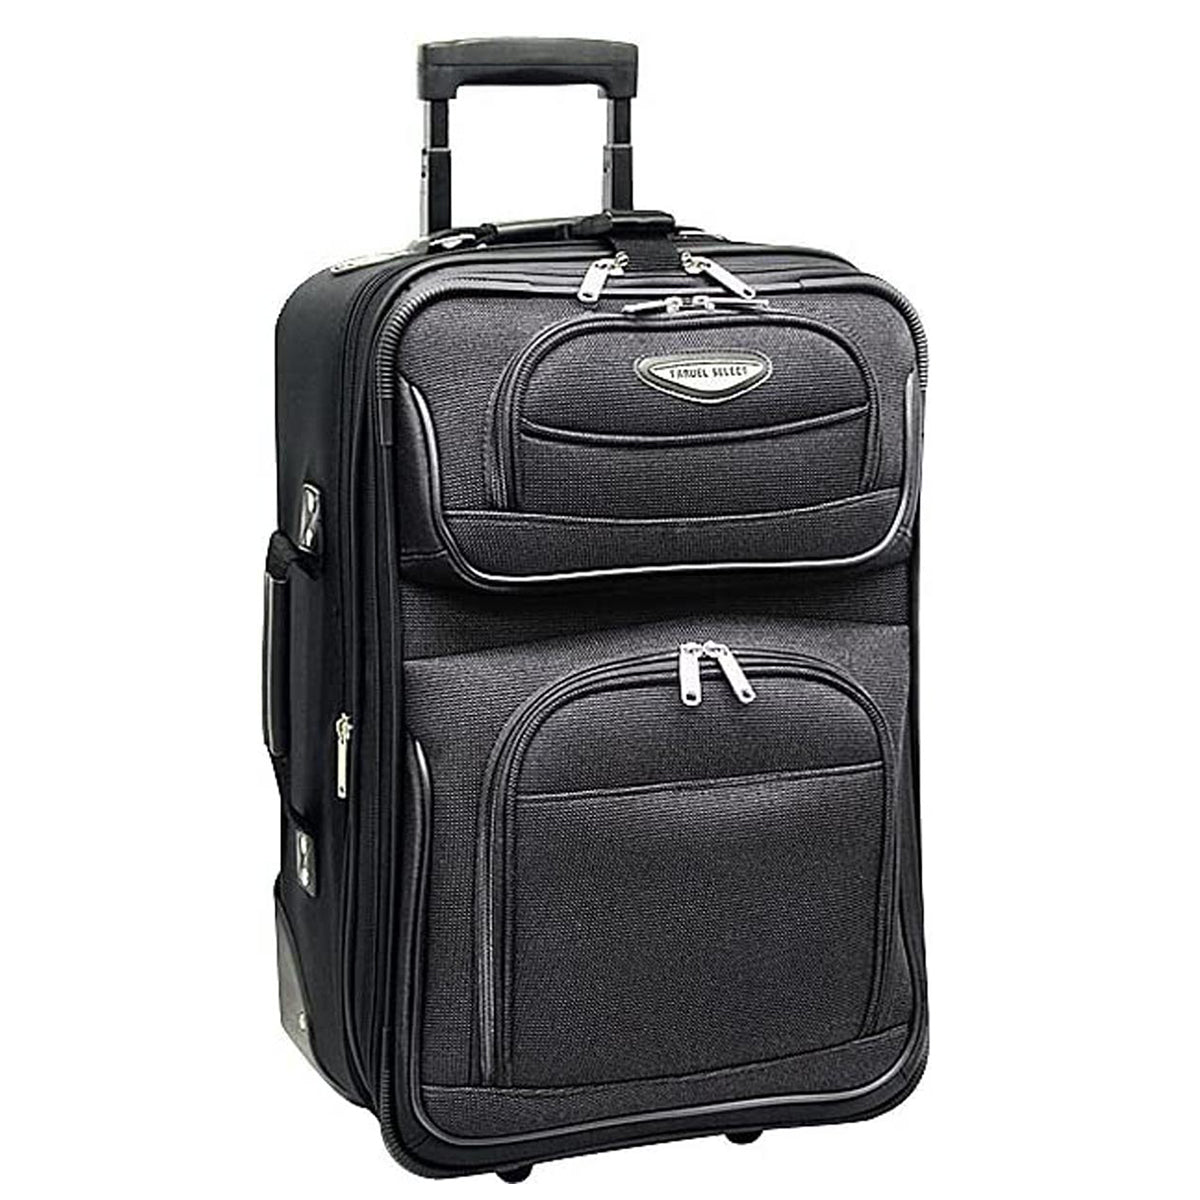 Travel Select Amsterdam Softside Expandable Rolling Luggage, TSA-Approved, Lightweight, Carry-on 21-Inch